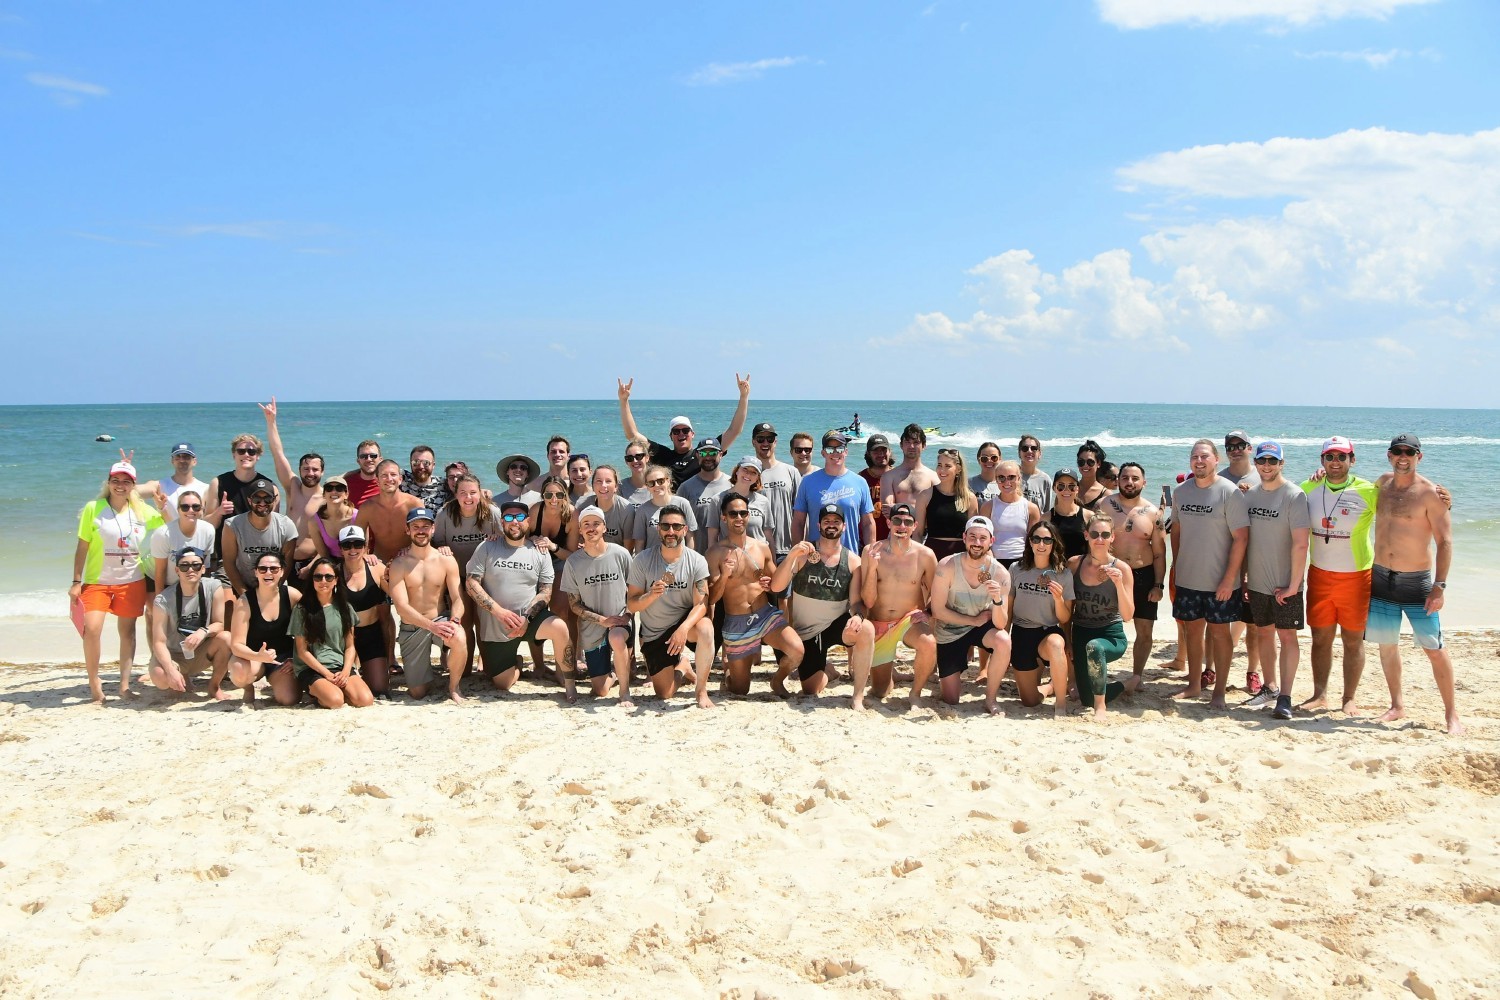 Postal employees at our Company Kick-Off, after beach olympics